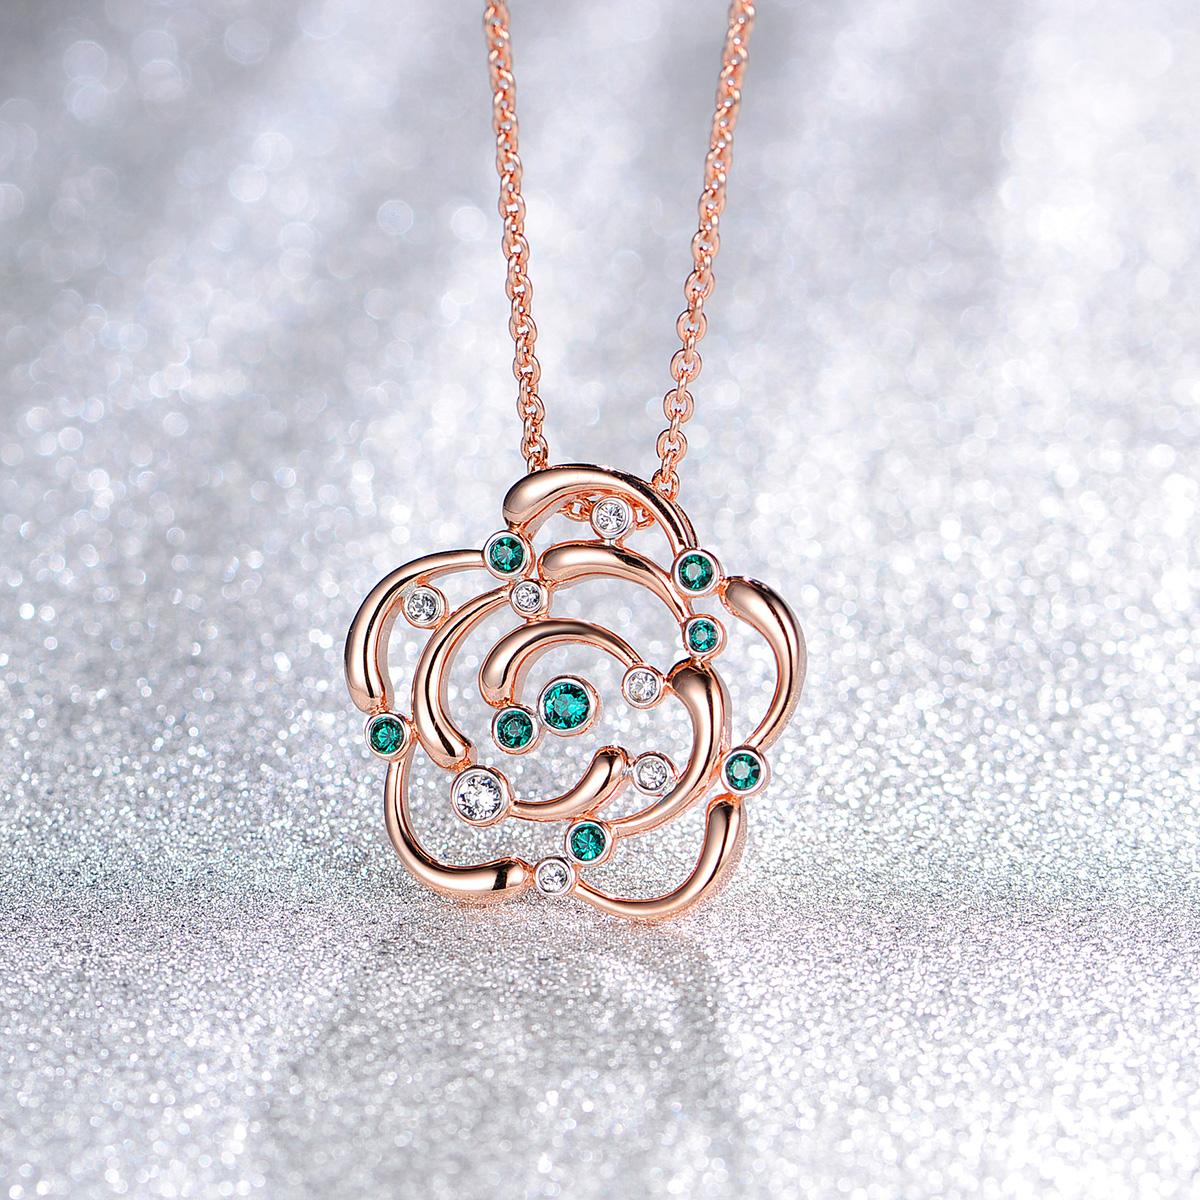 Christmas camellia rose gold pendant necklace